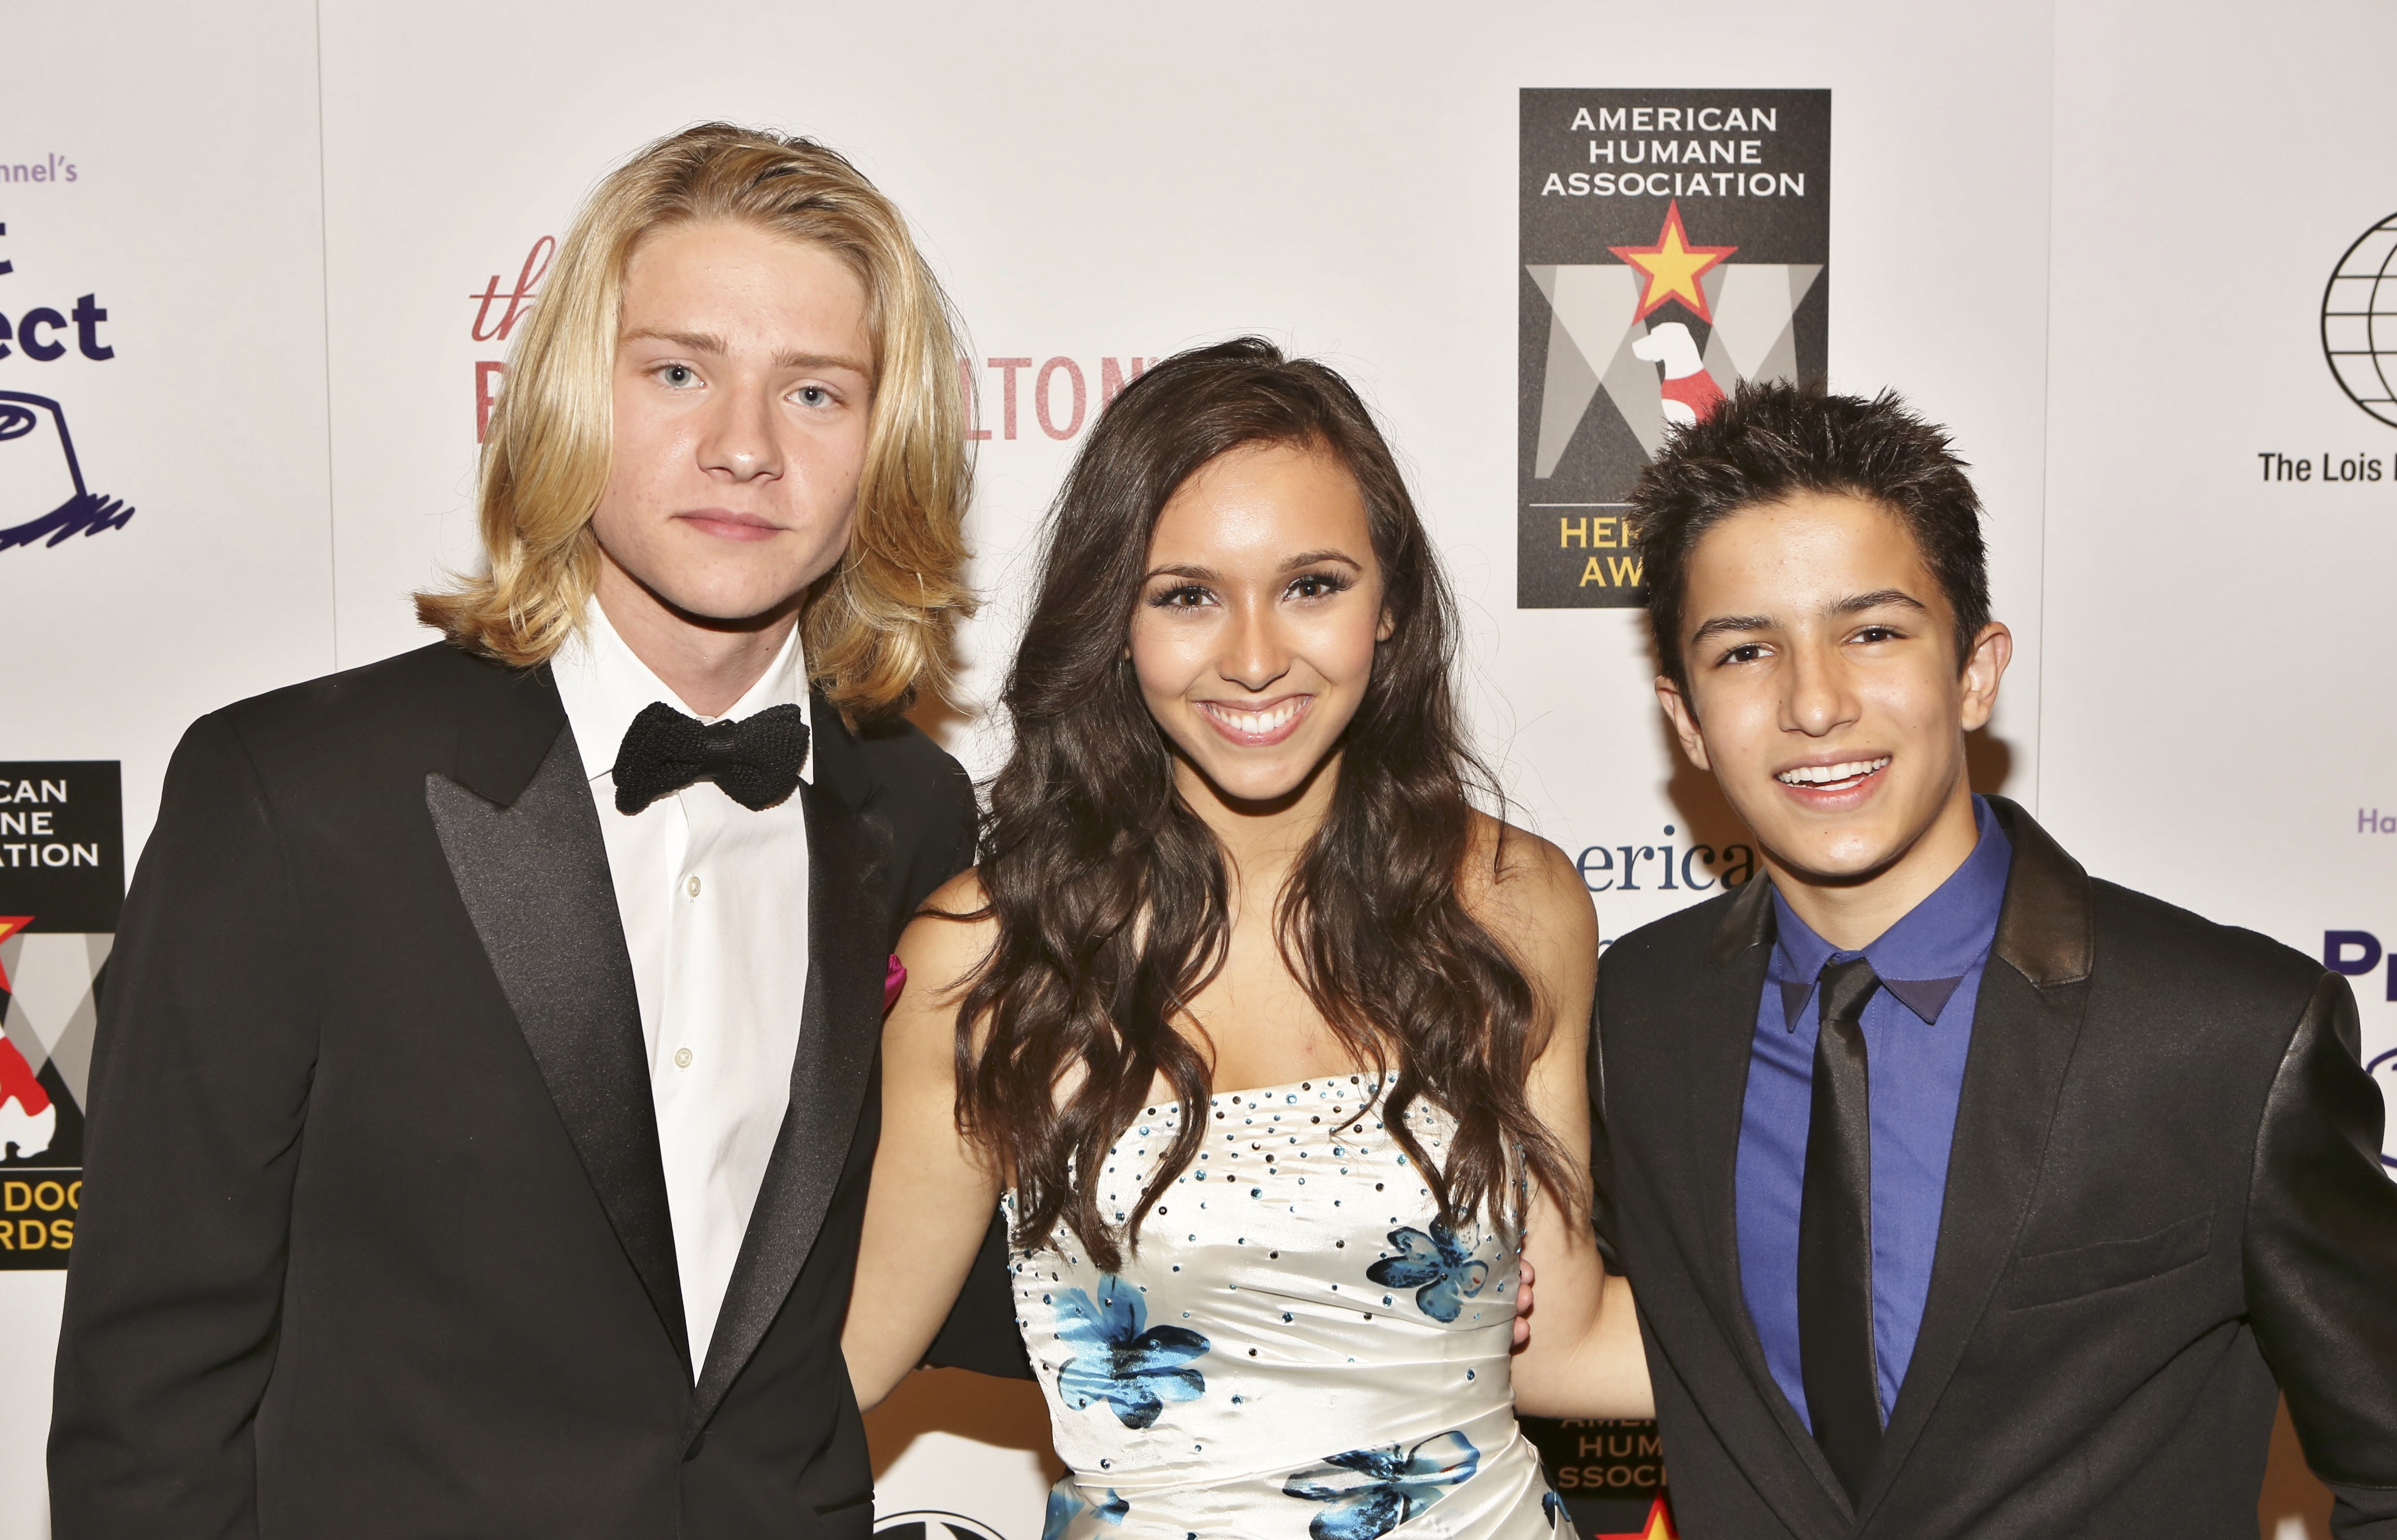 Young Hollywood for Humanity at the 2013 American Humane Association's Hero Dog Awards, Beverly Hilton. Lou Wegner, Nicole Cummins, and Aramis Knight.